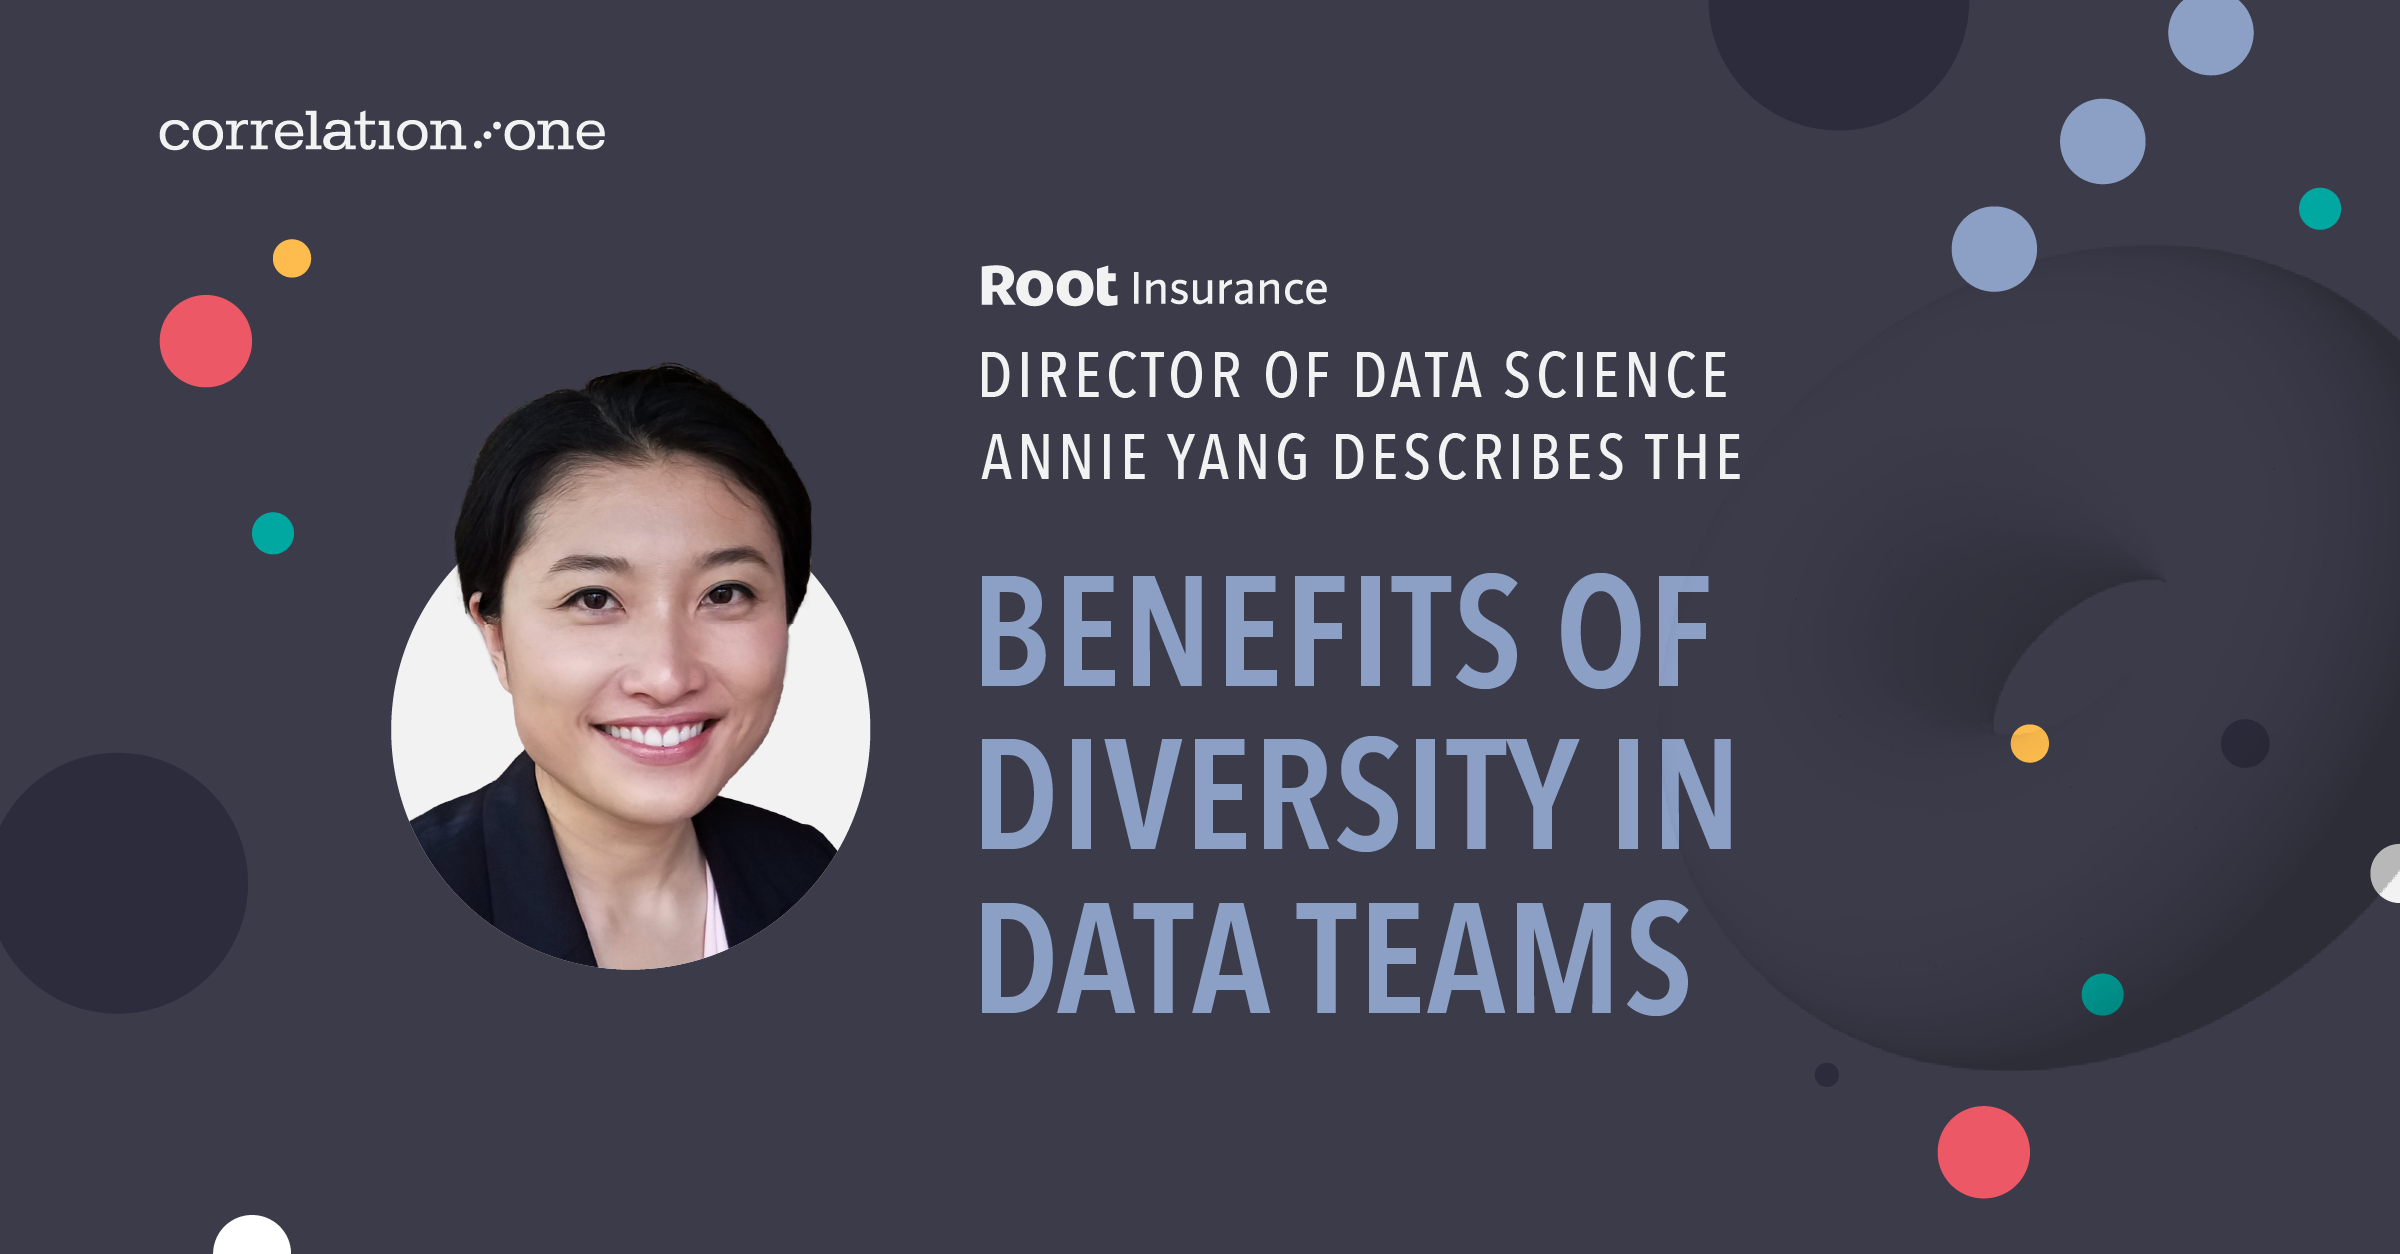 Root Inc. Director of Data Science Annie Yang on the Benefits of Diversity in Data Teams